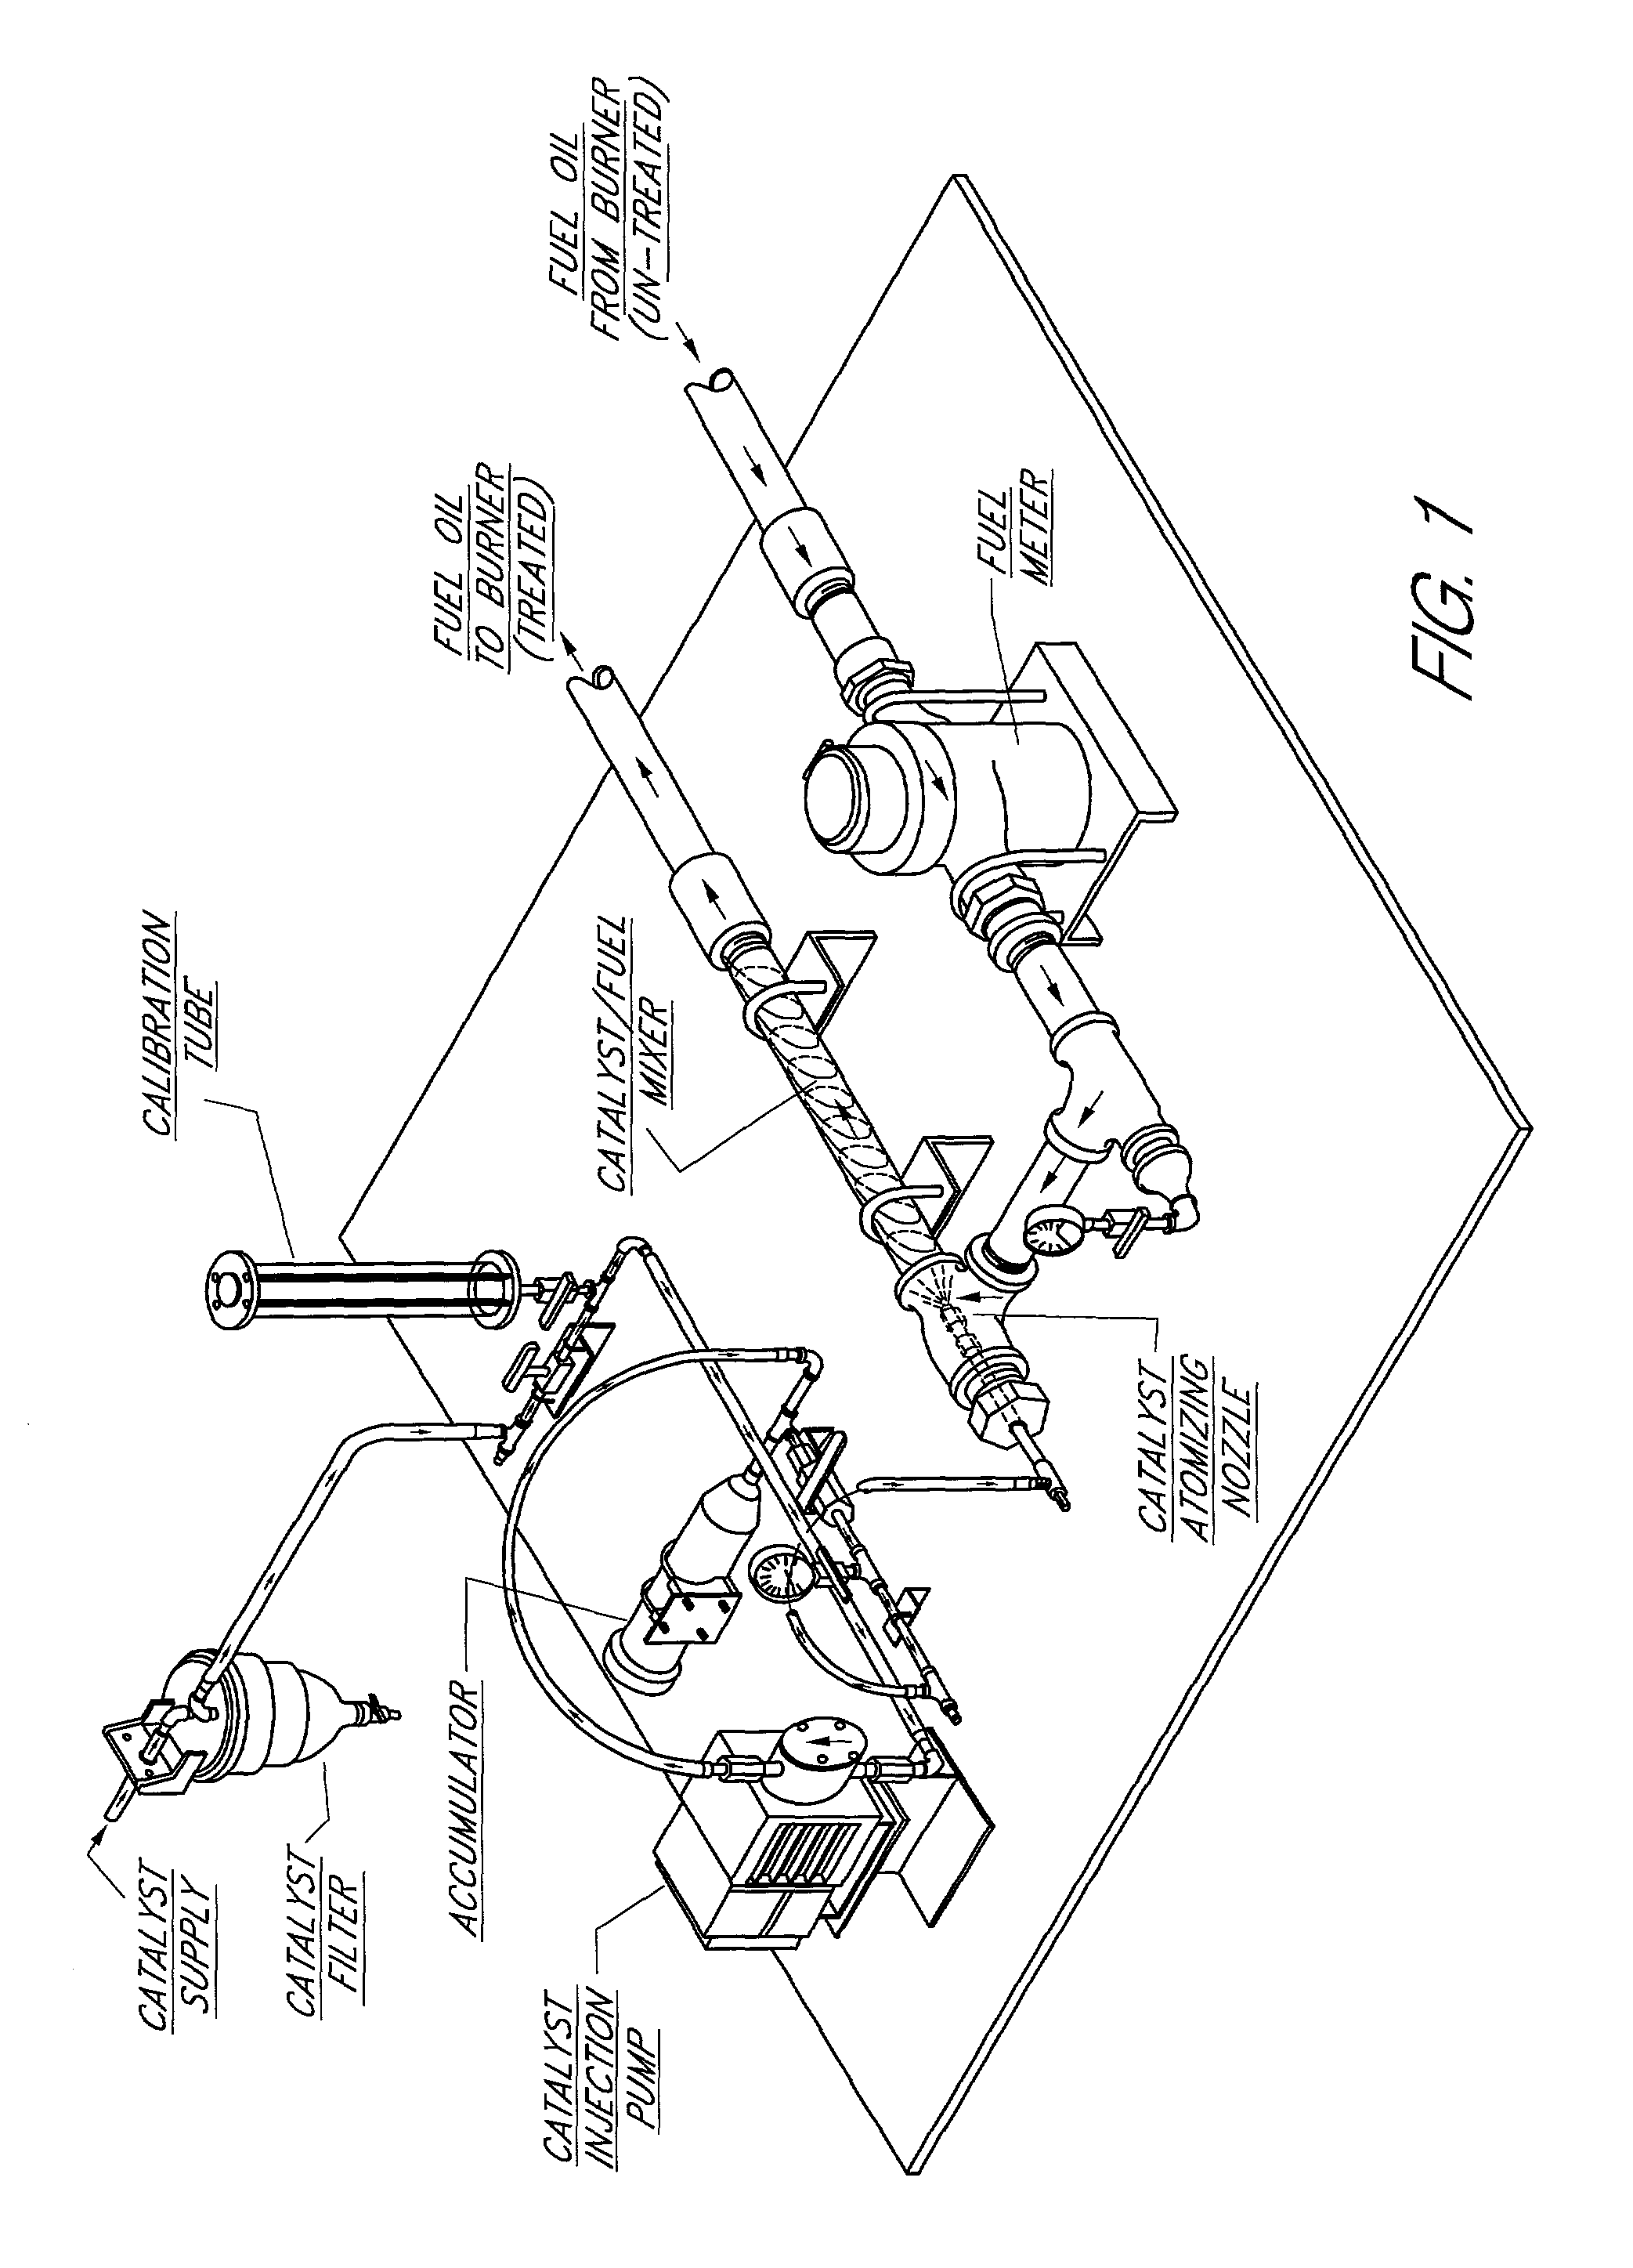 Method and composition for using organic, plant-derived, oil-extracted materials in two-cycle oil additives for reduced emissions